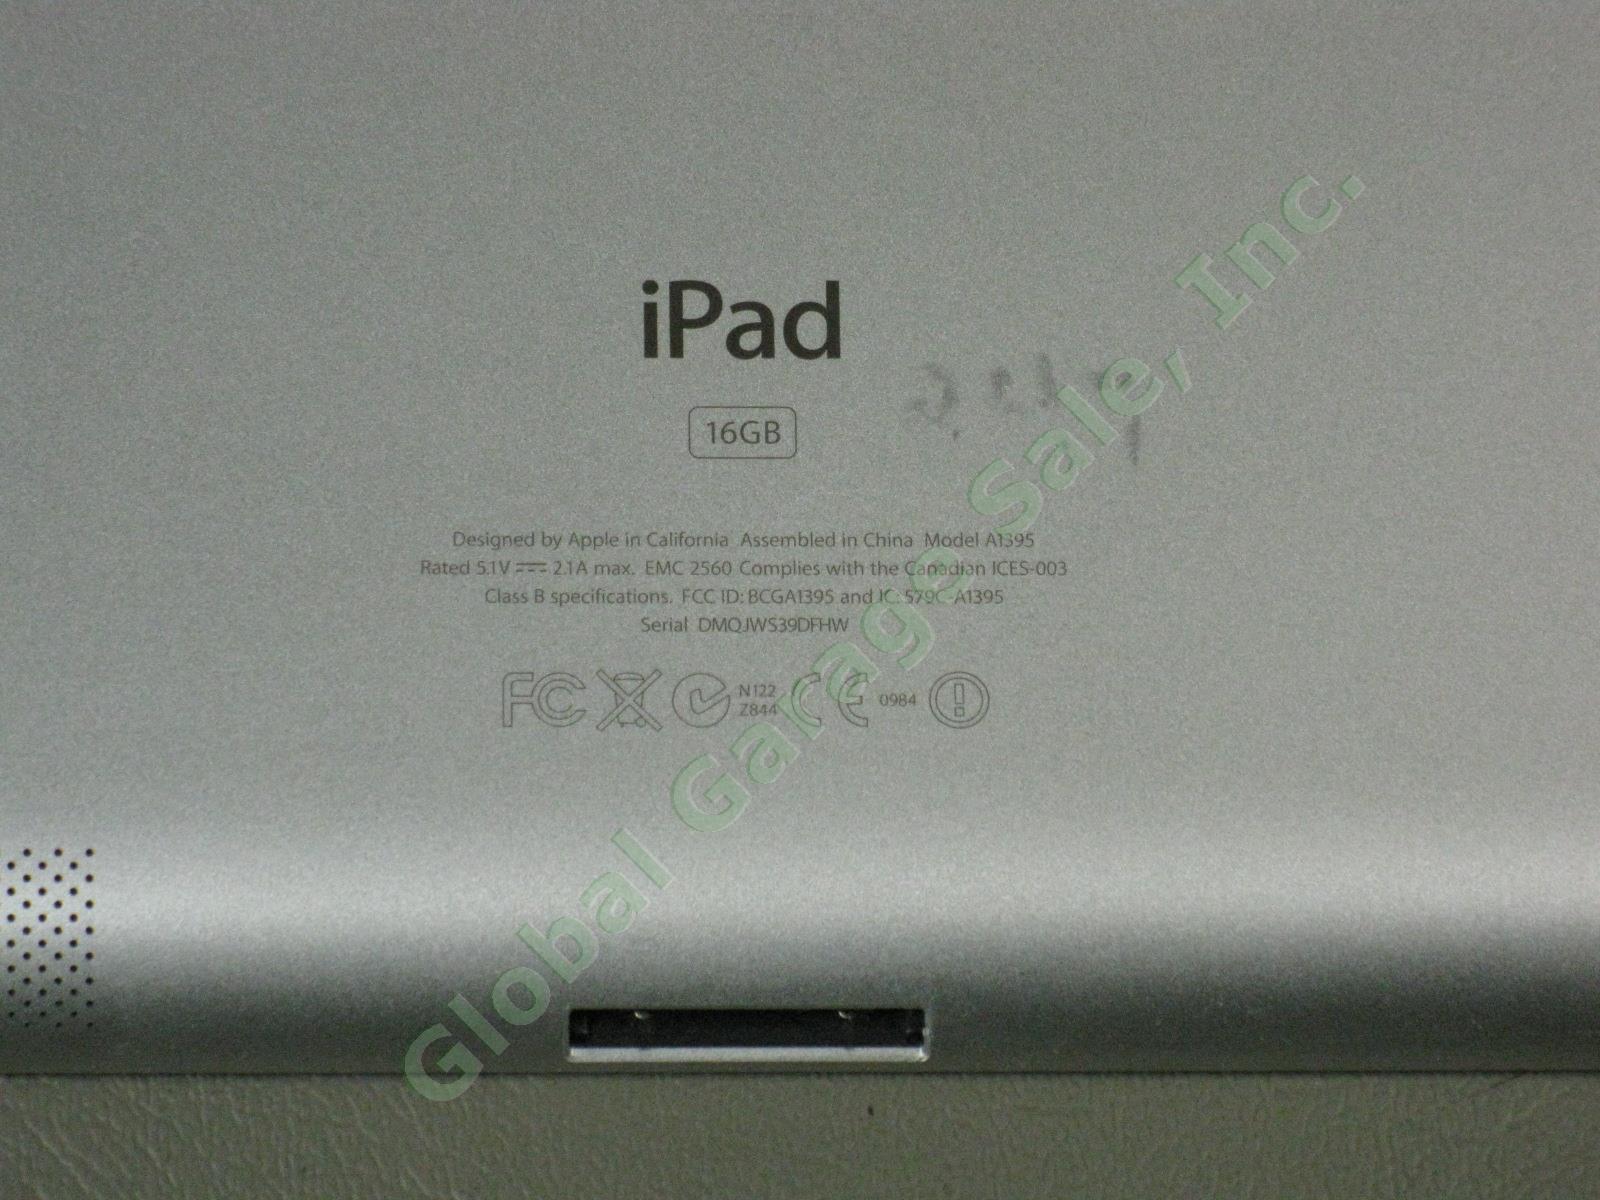 Apple iPad 2 Tablet Model A1395 16GB Wi-Fi Black Works Great One Owner NO RES! 4